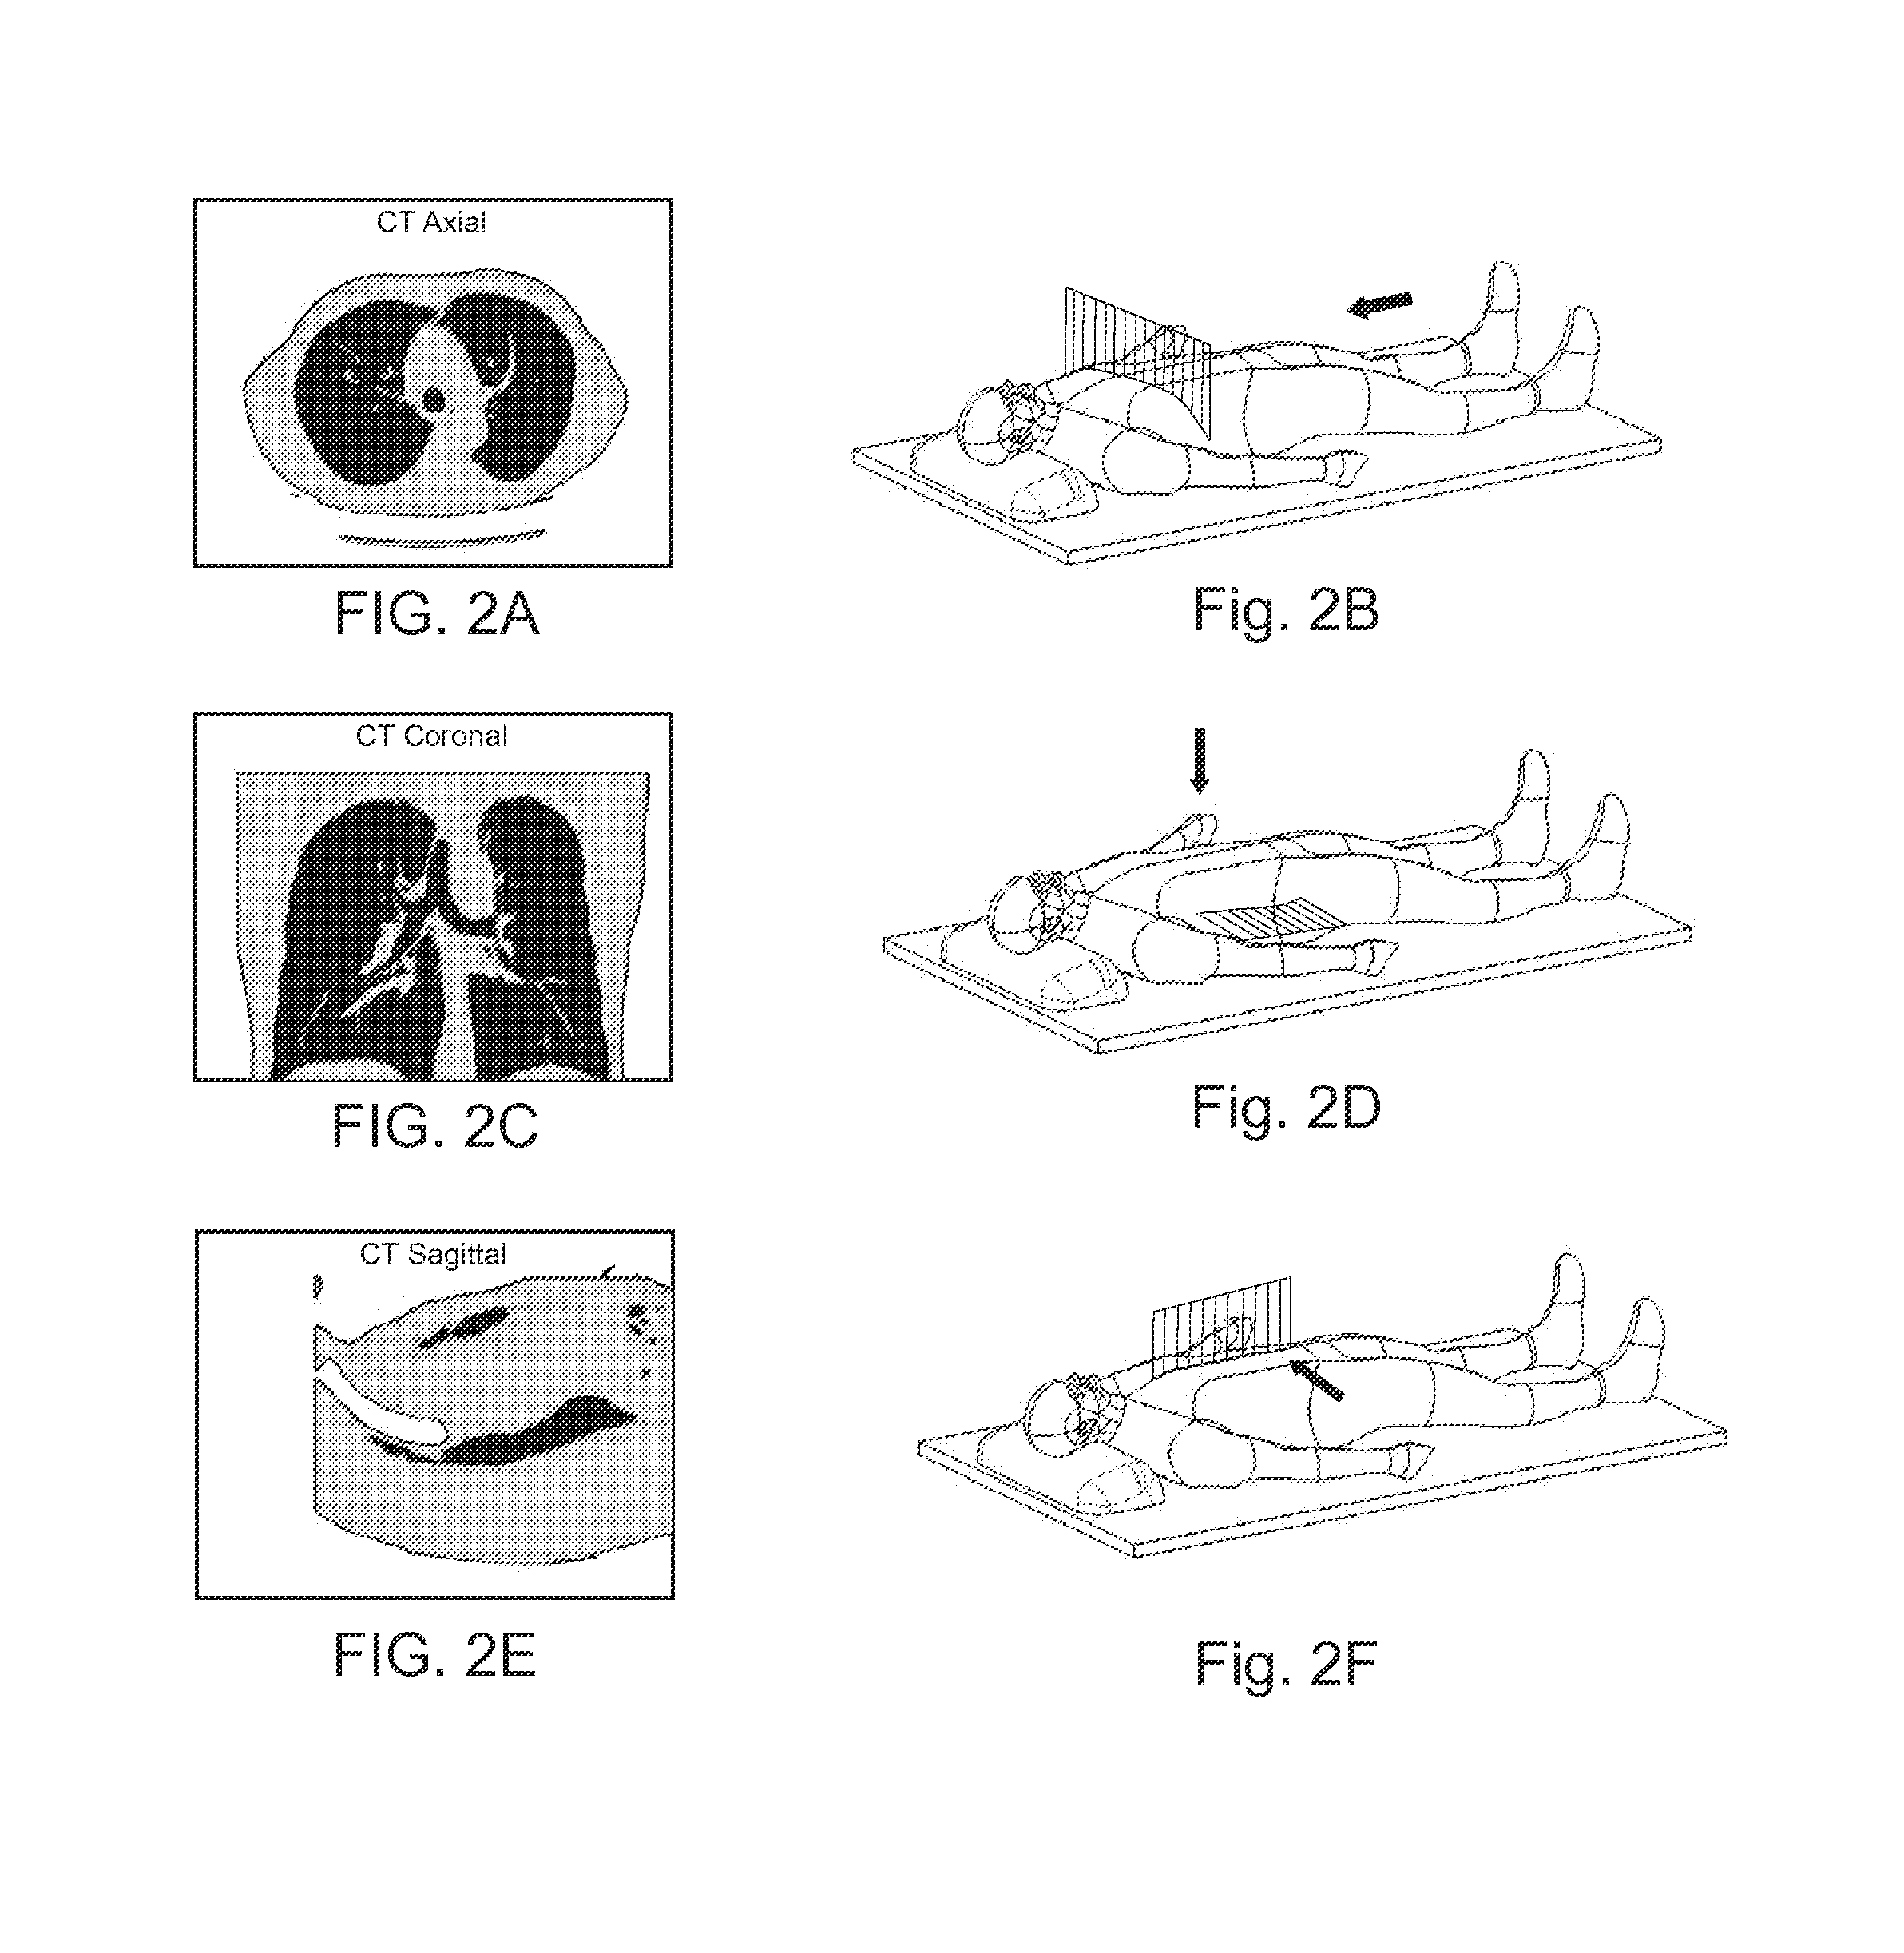 Pathway planning system and method